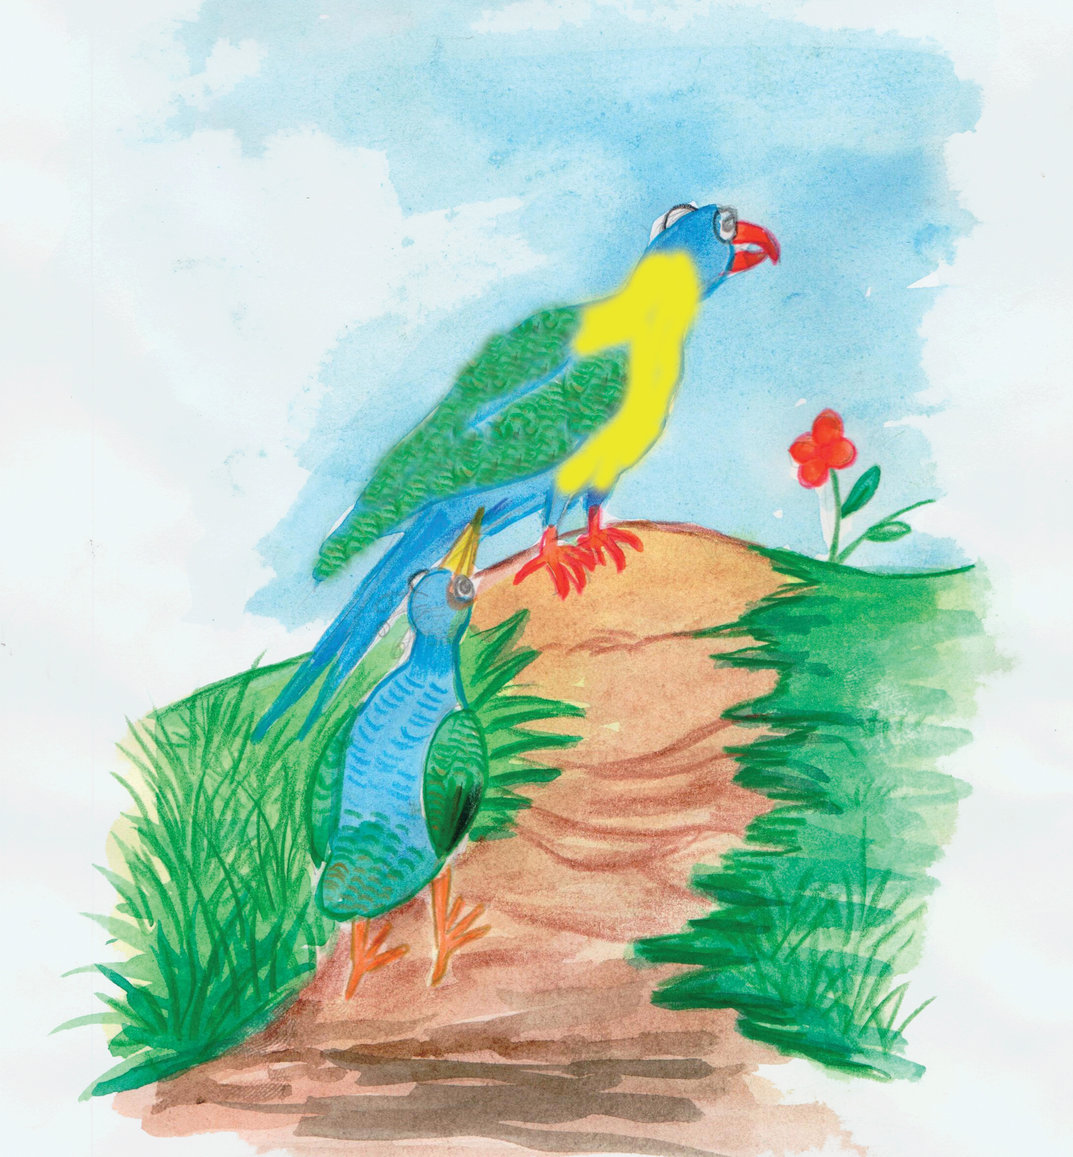 Parrot Drawing - Etsy